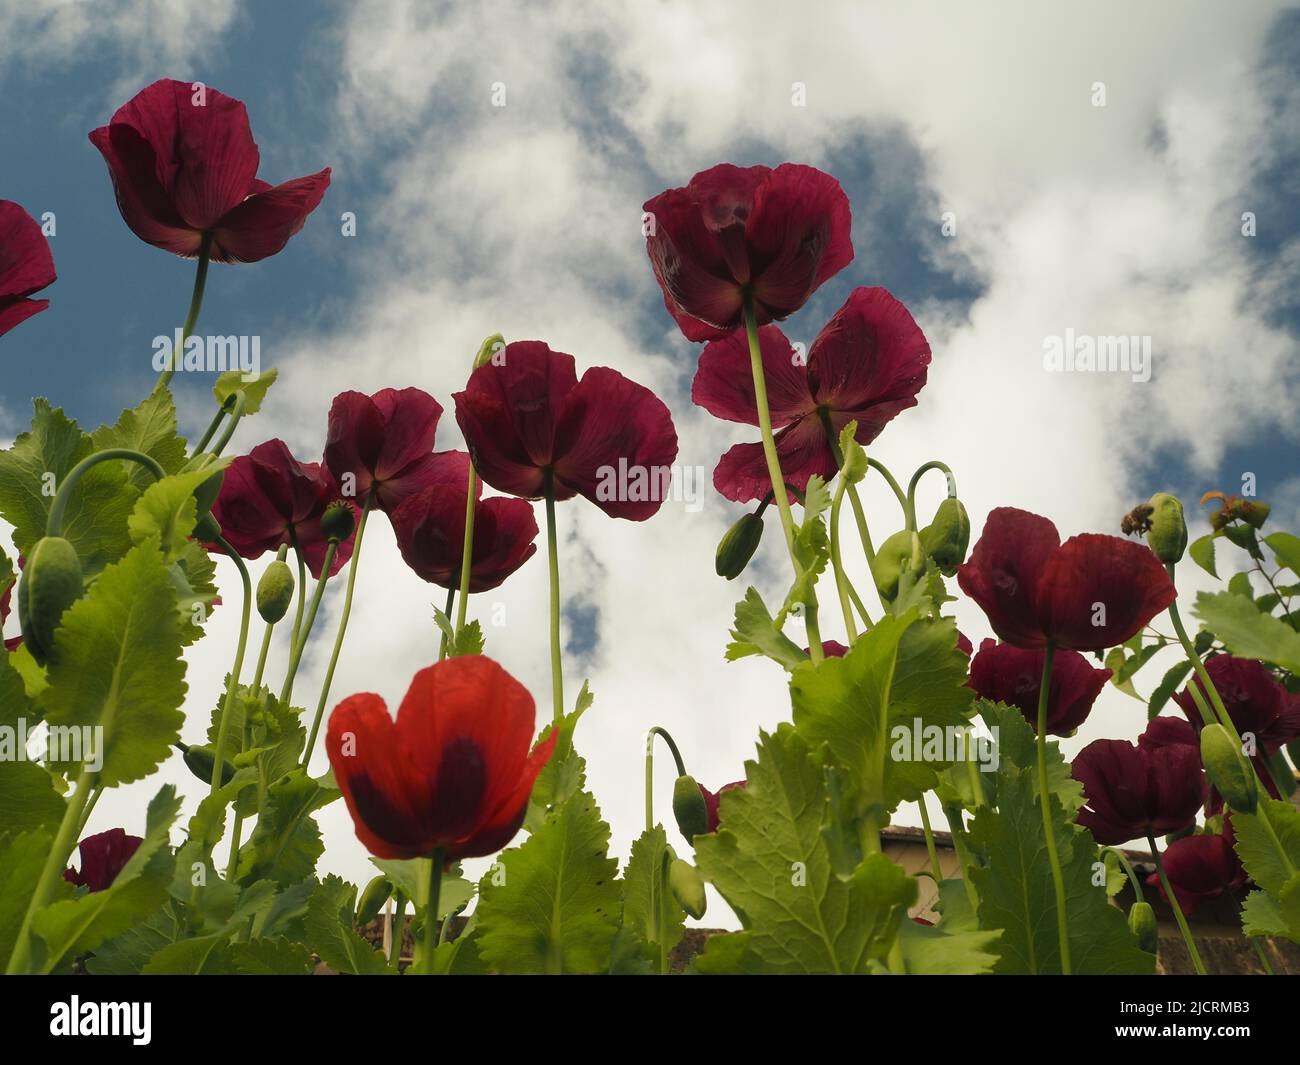 Plum, scarlet or purple Oriental poppies (papaver) which have self seeded in a re-wilded English garden, set against a blue sky with fluffy clouds. Stock Photo